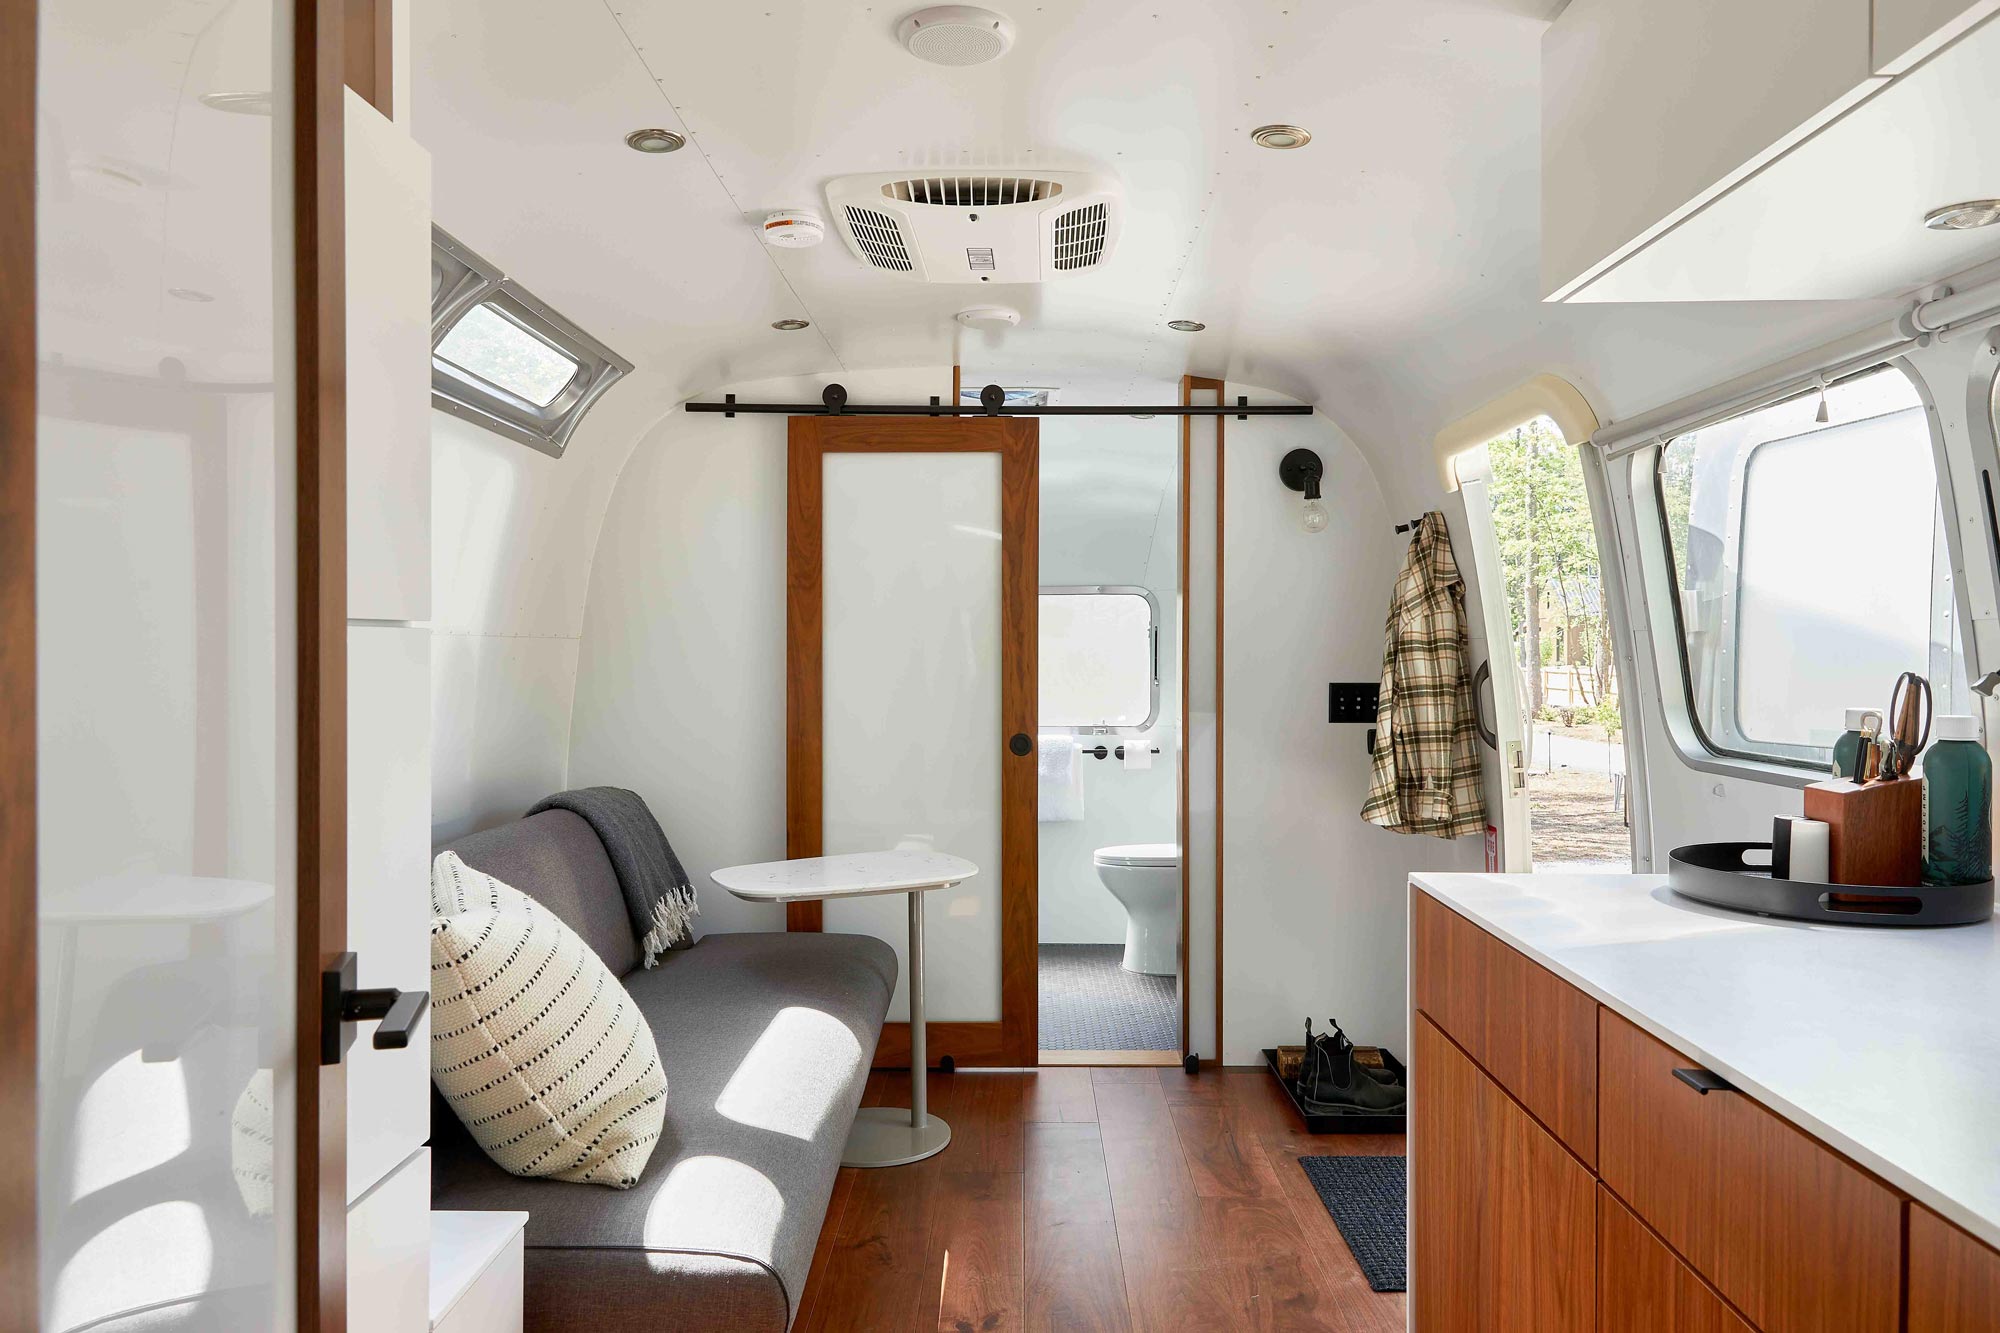 One of 65 Airstreams available to be booked at AutoCamp